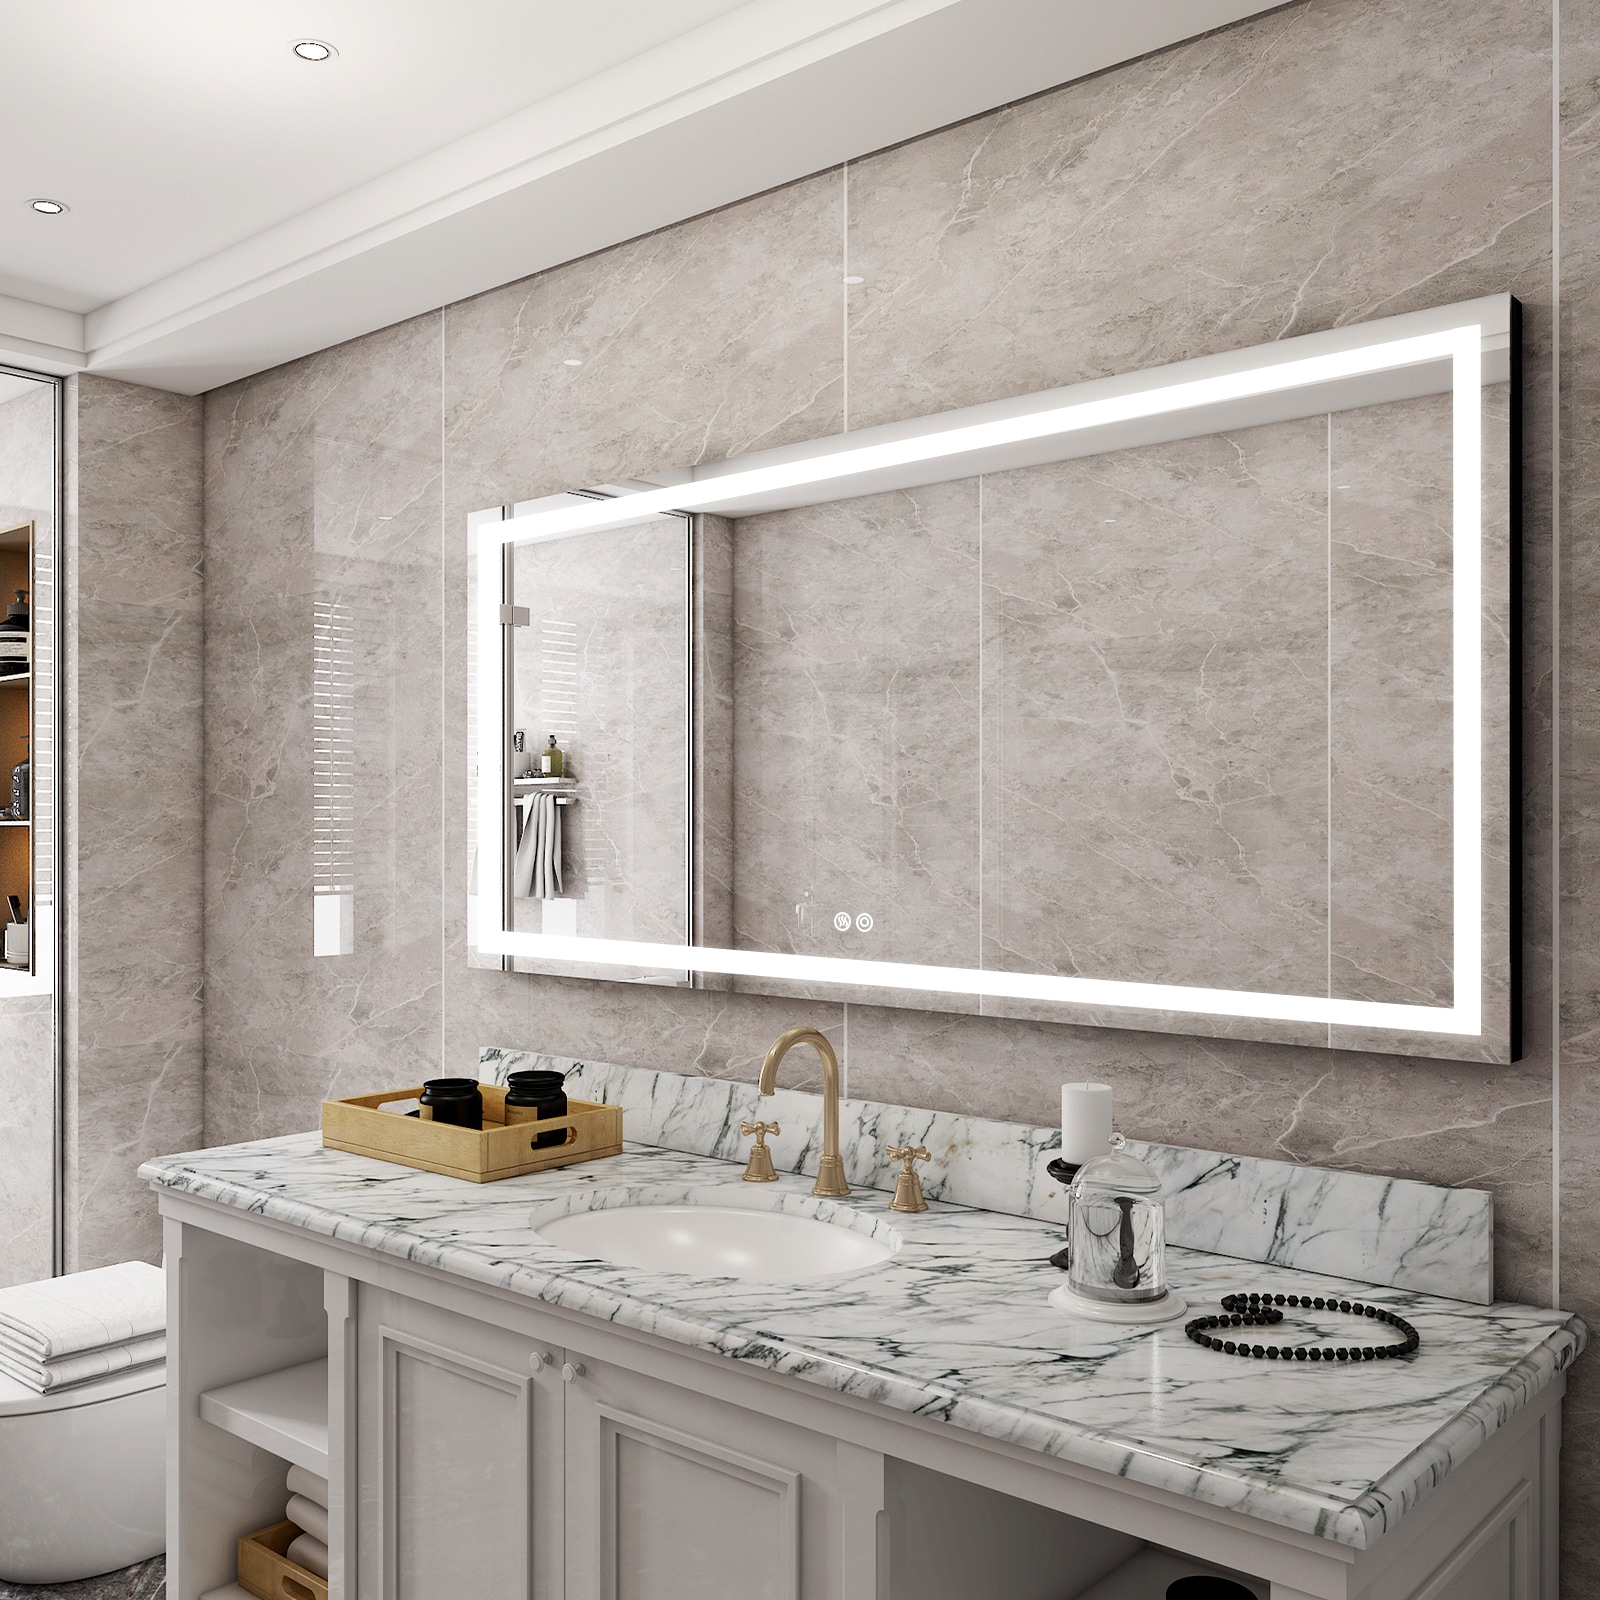 Front-Lighted LED Bathroom Vanity Mirror: 48 x 48 - Square